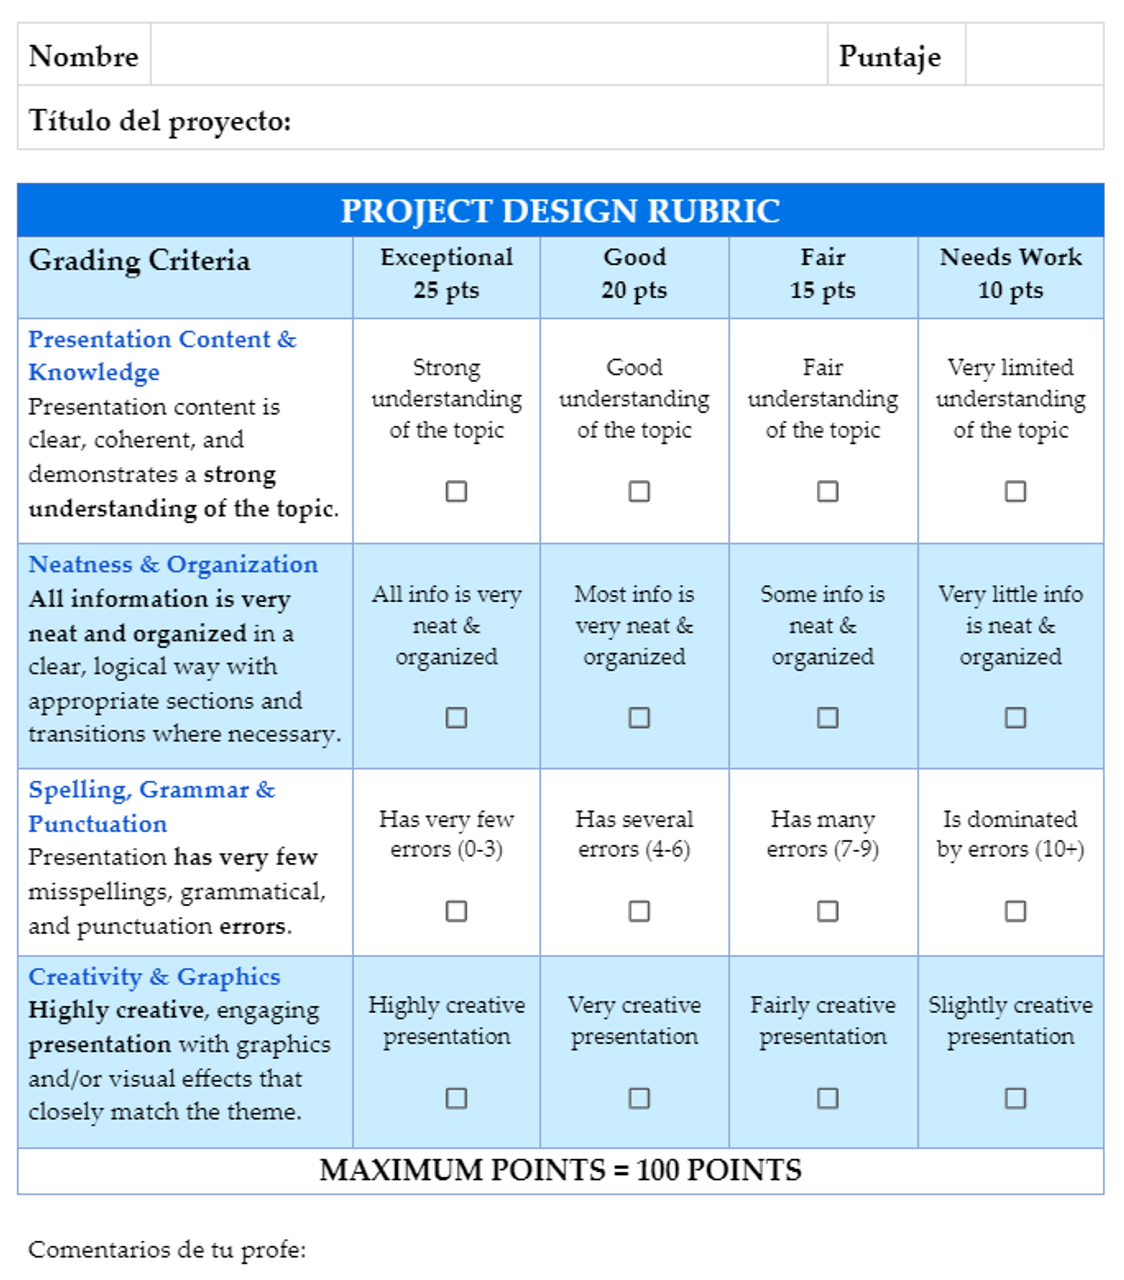 Project Design Assessment Rubrics - Simplified for Easy Grading!